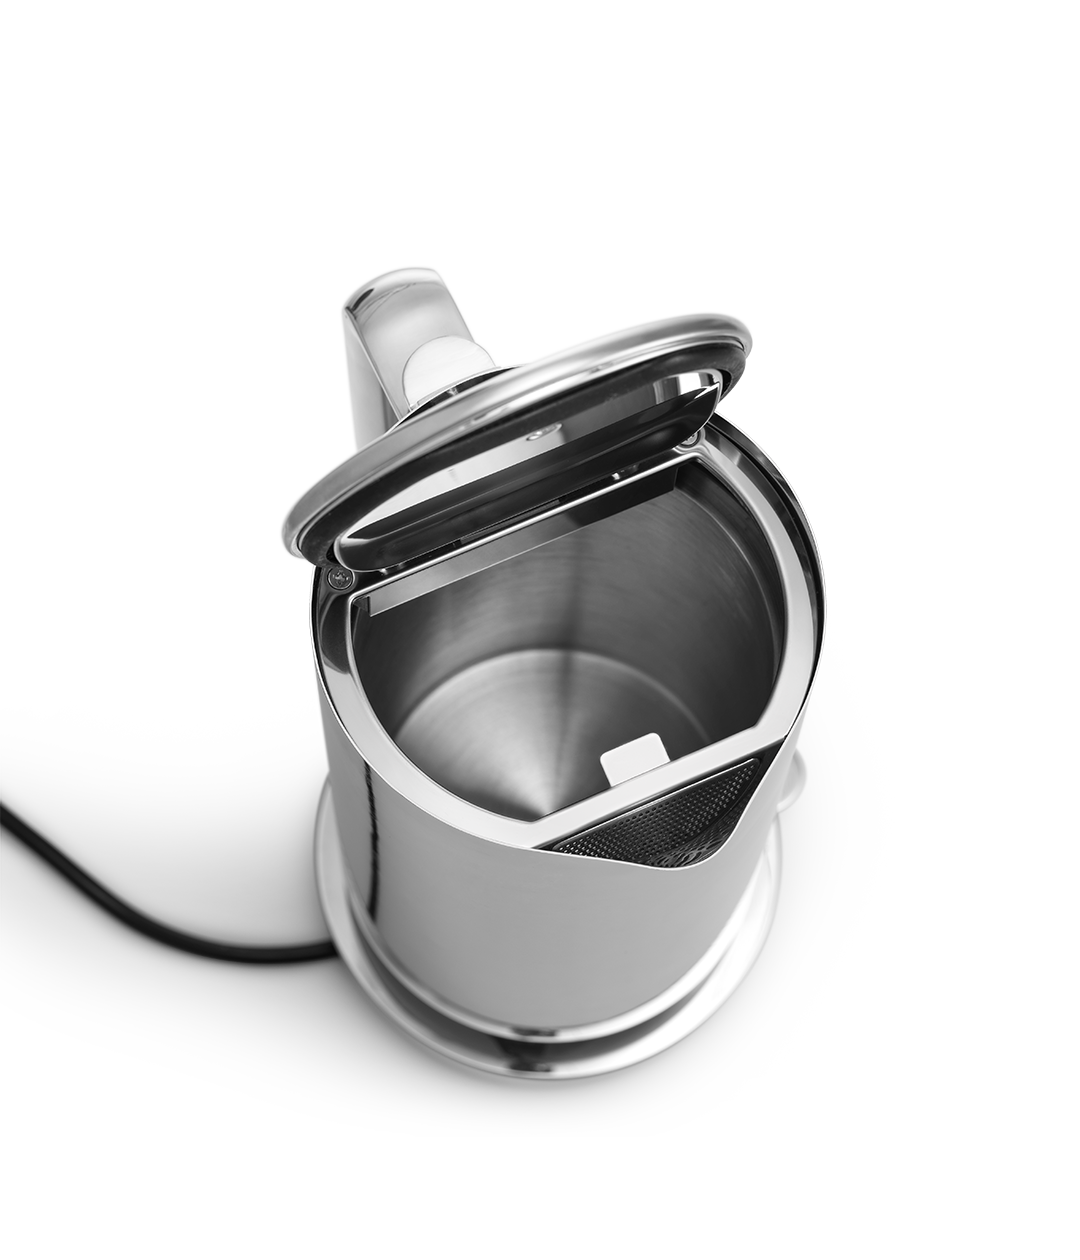 Aarke Stainless Steel Kettle. Top view with lid open.